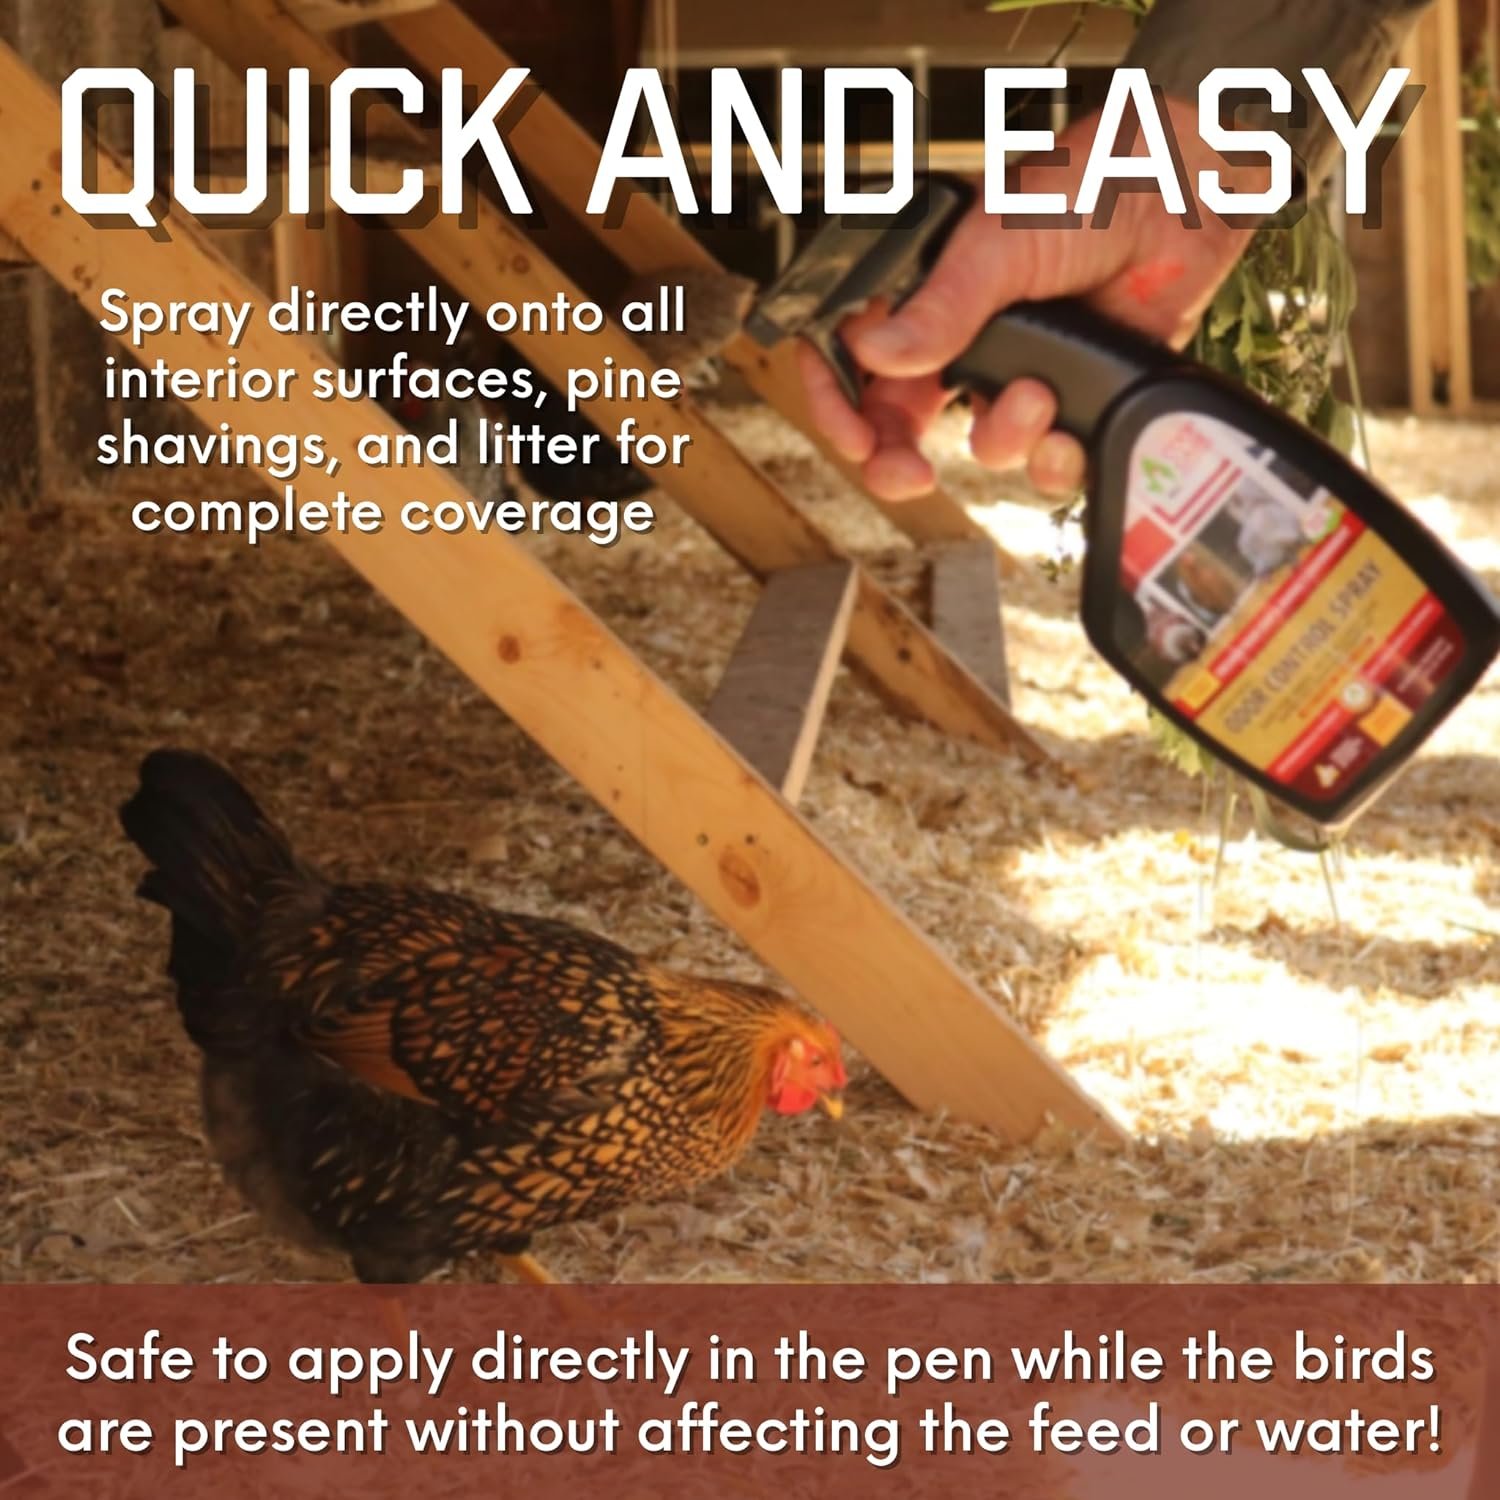 Chick Fresh - Odor Control Spray for Backyard Chickens. Eliminate Chicken Coop, Brooder, Nest Boxes, Hen Houses, Rabbit Hutches Odor  More! 24 oz Spray Bottle (2 Pack)